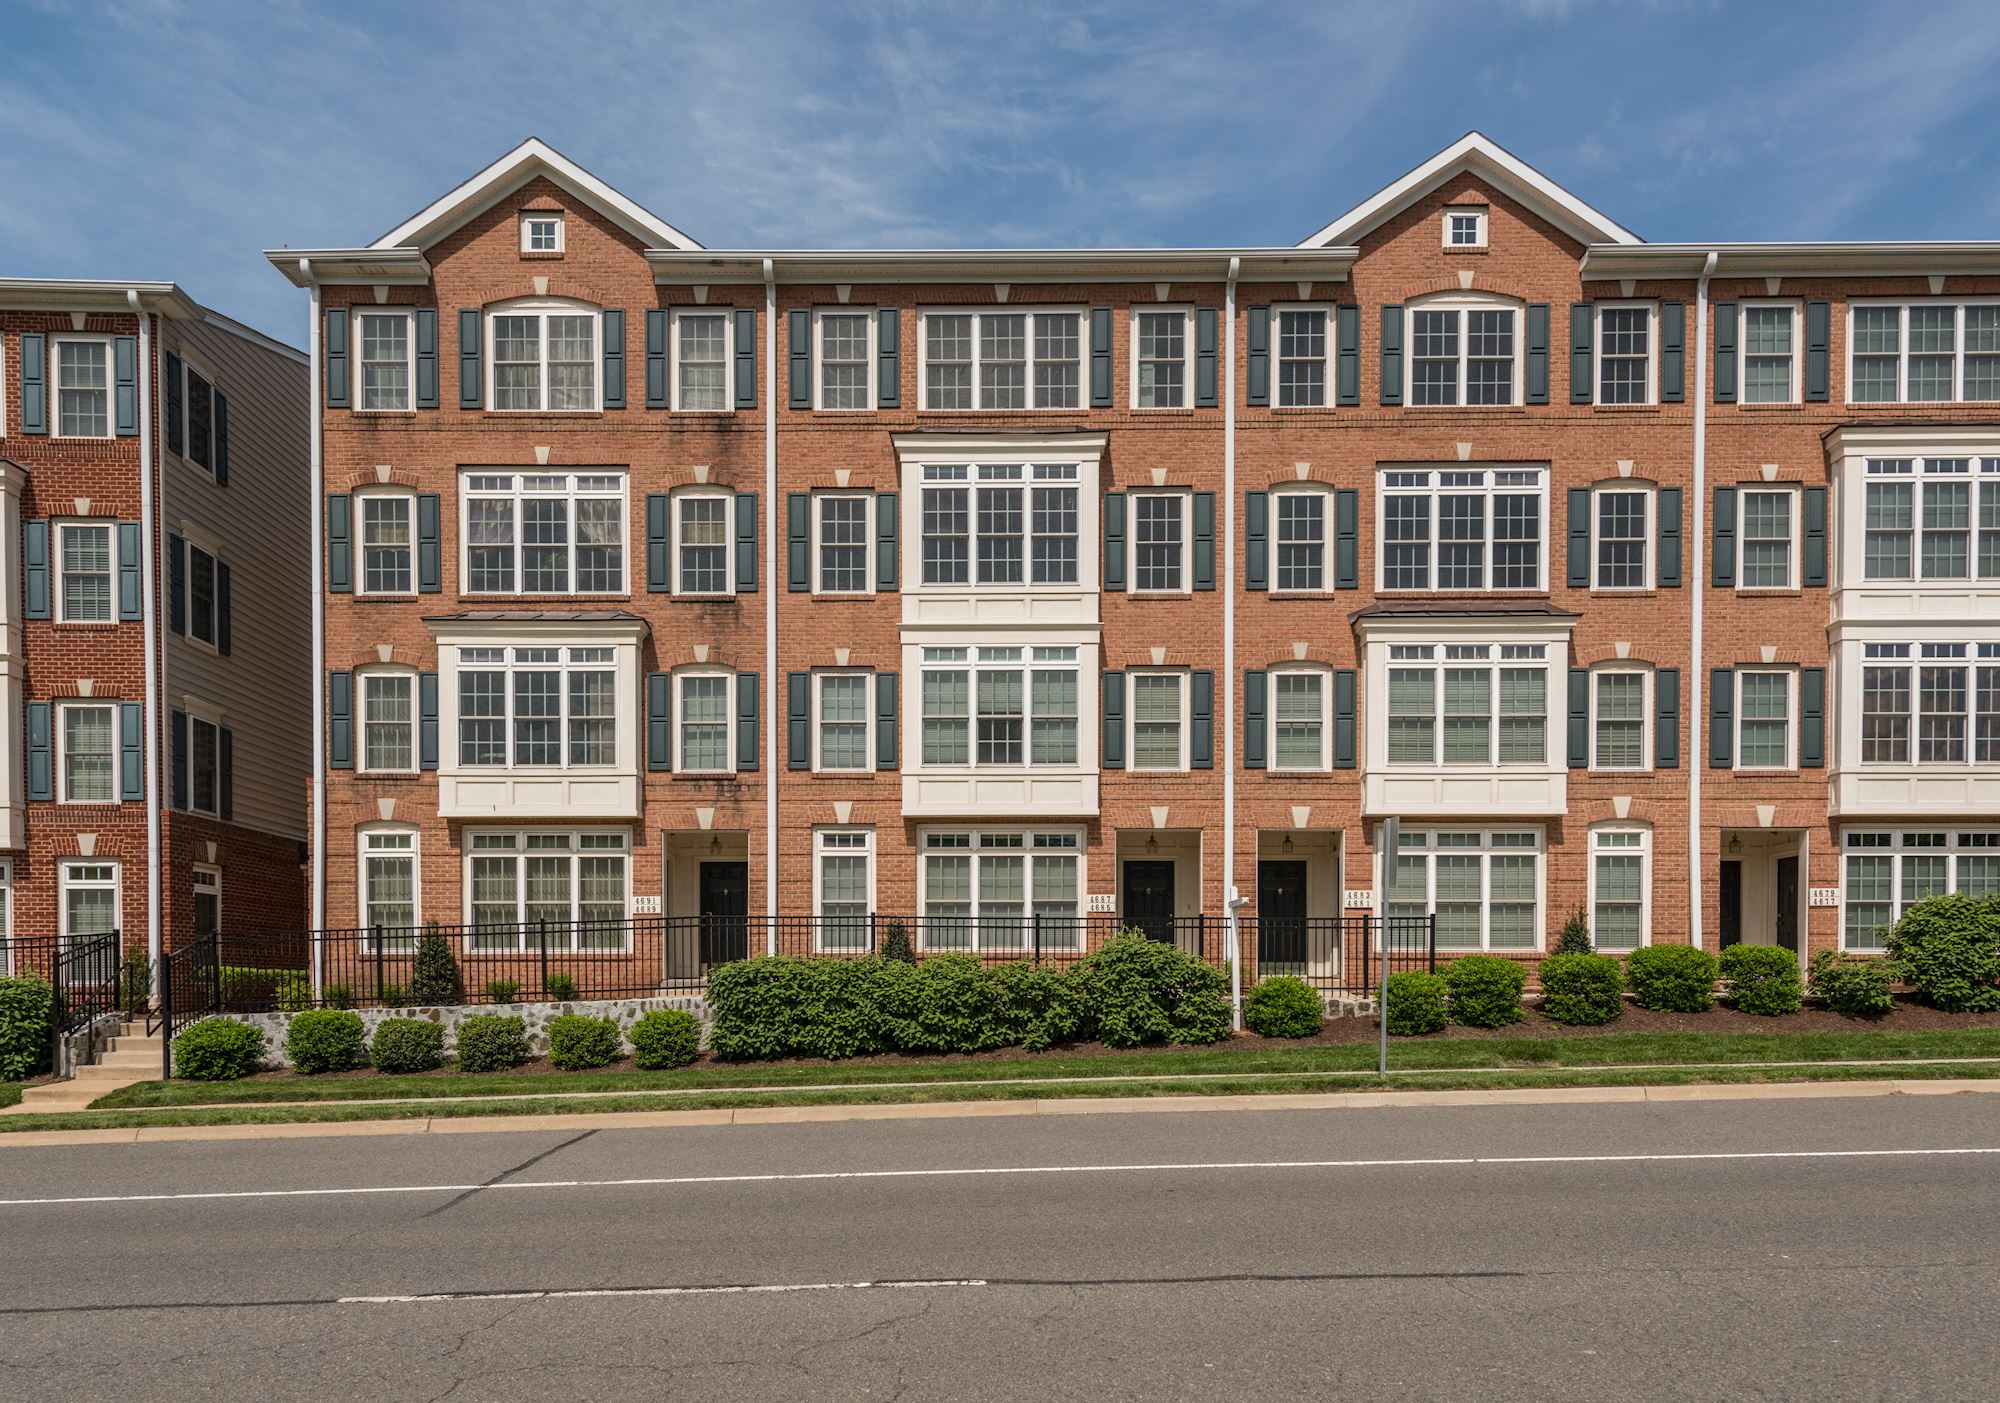 SOLD: Luxury 3 Bed Townhouse In Fairfax